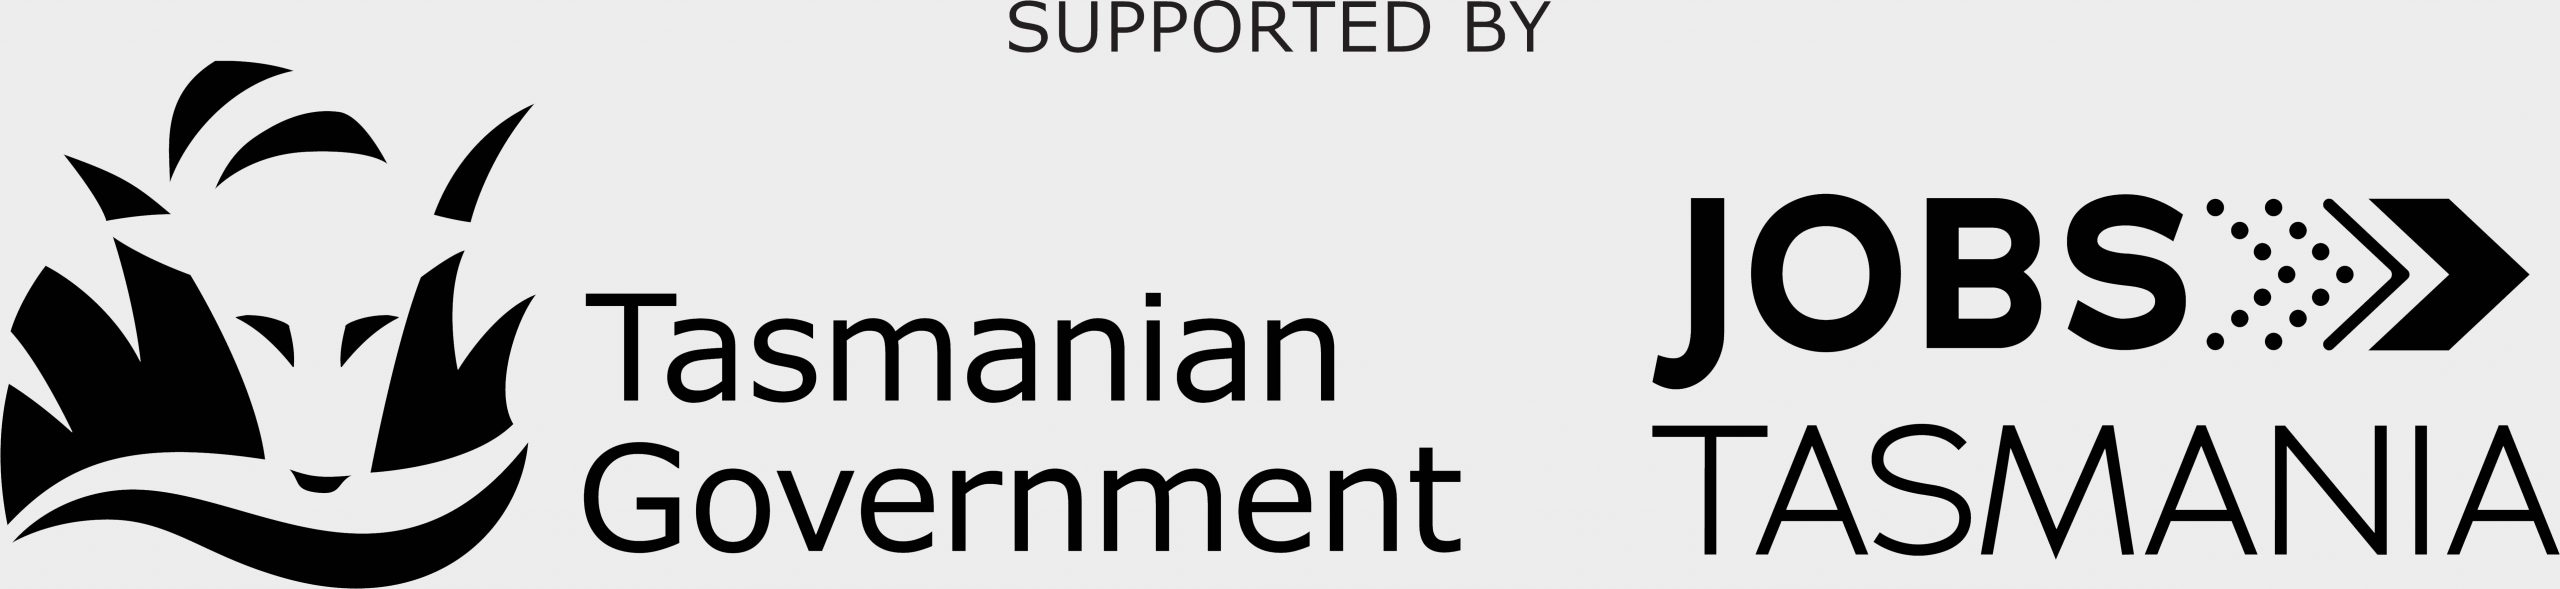 Supported by: Tasmanian Government logo